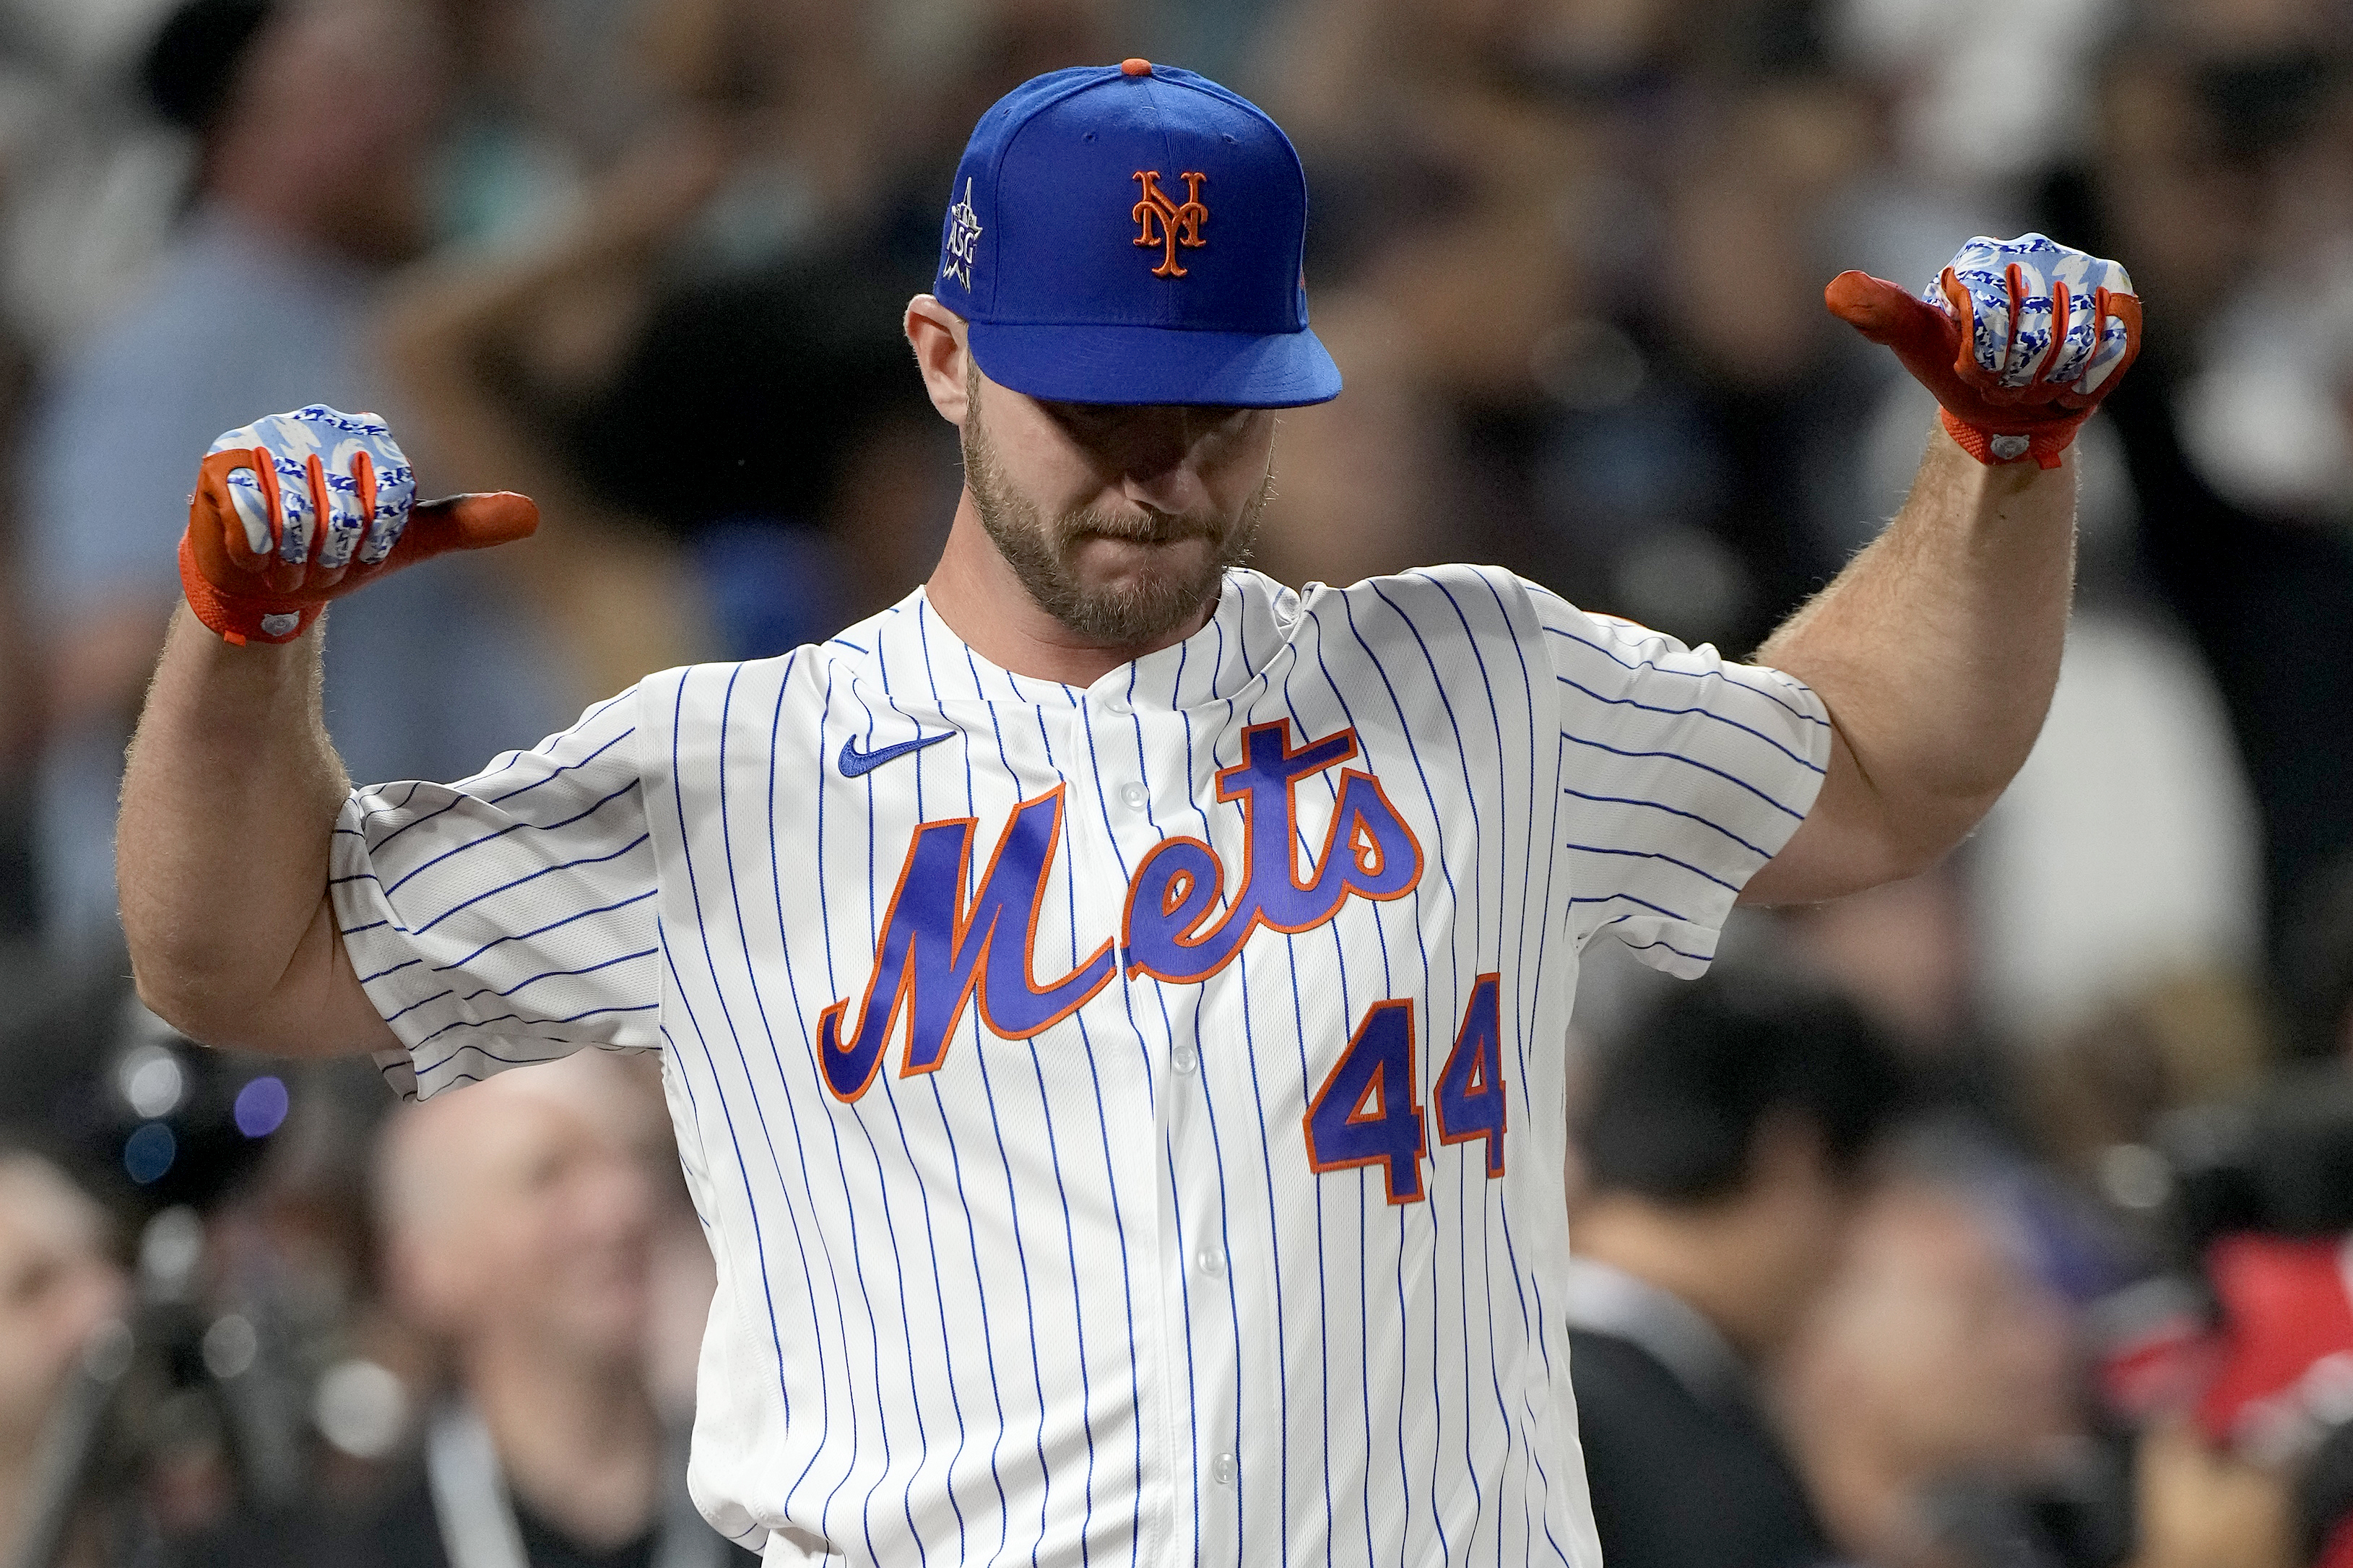 Mets' Pete Alonso tops Trey Mancini to win Home Run Derby - The